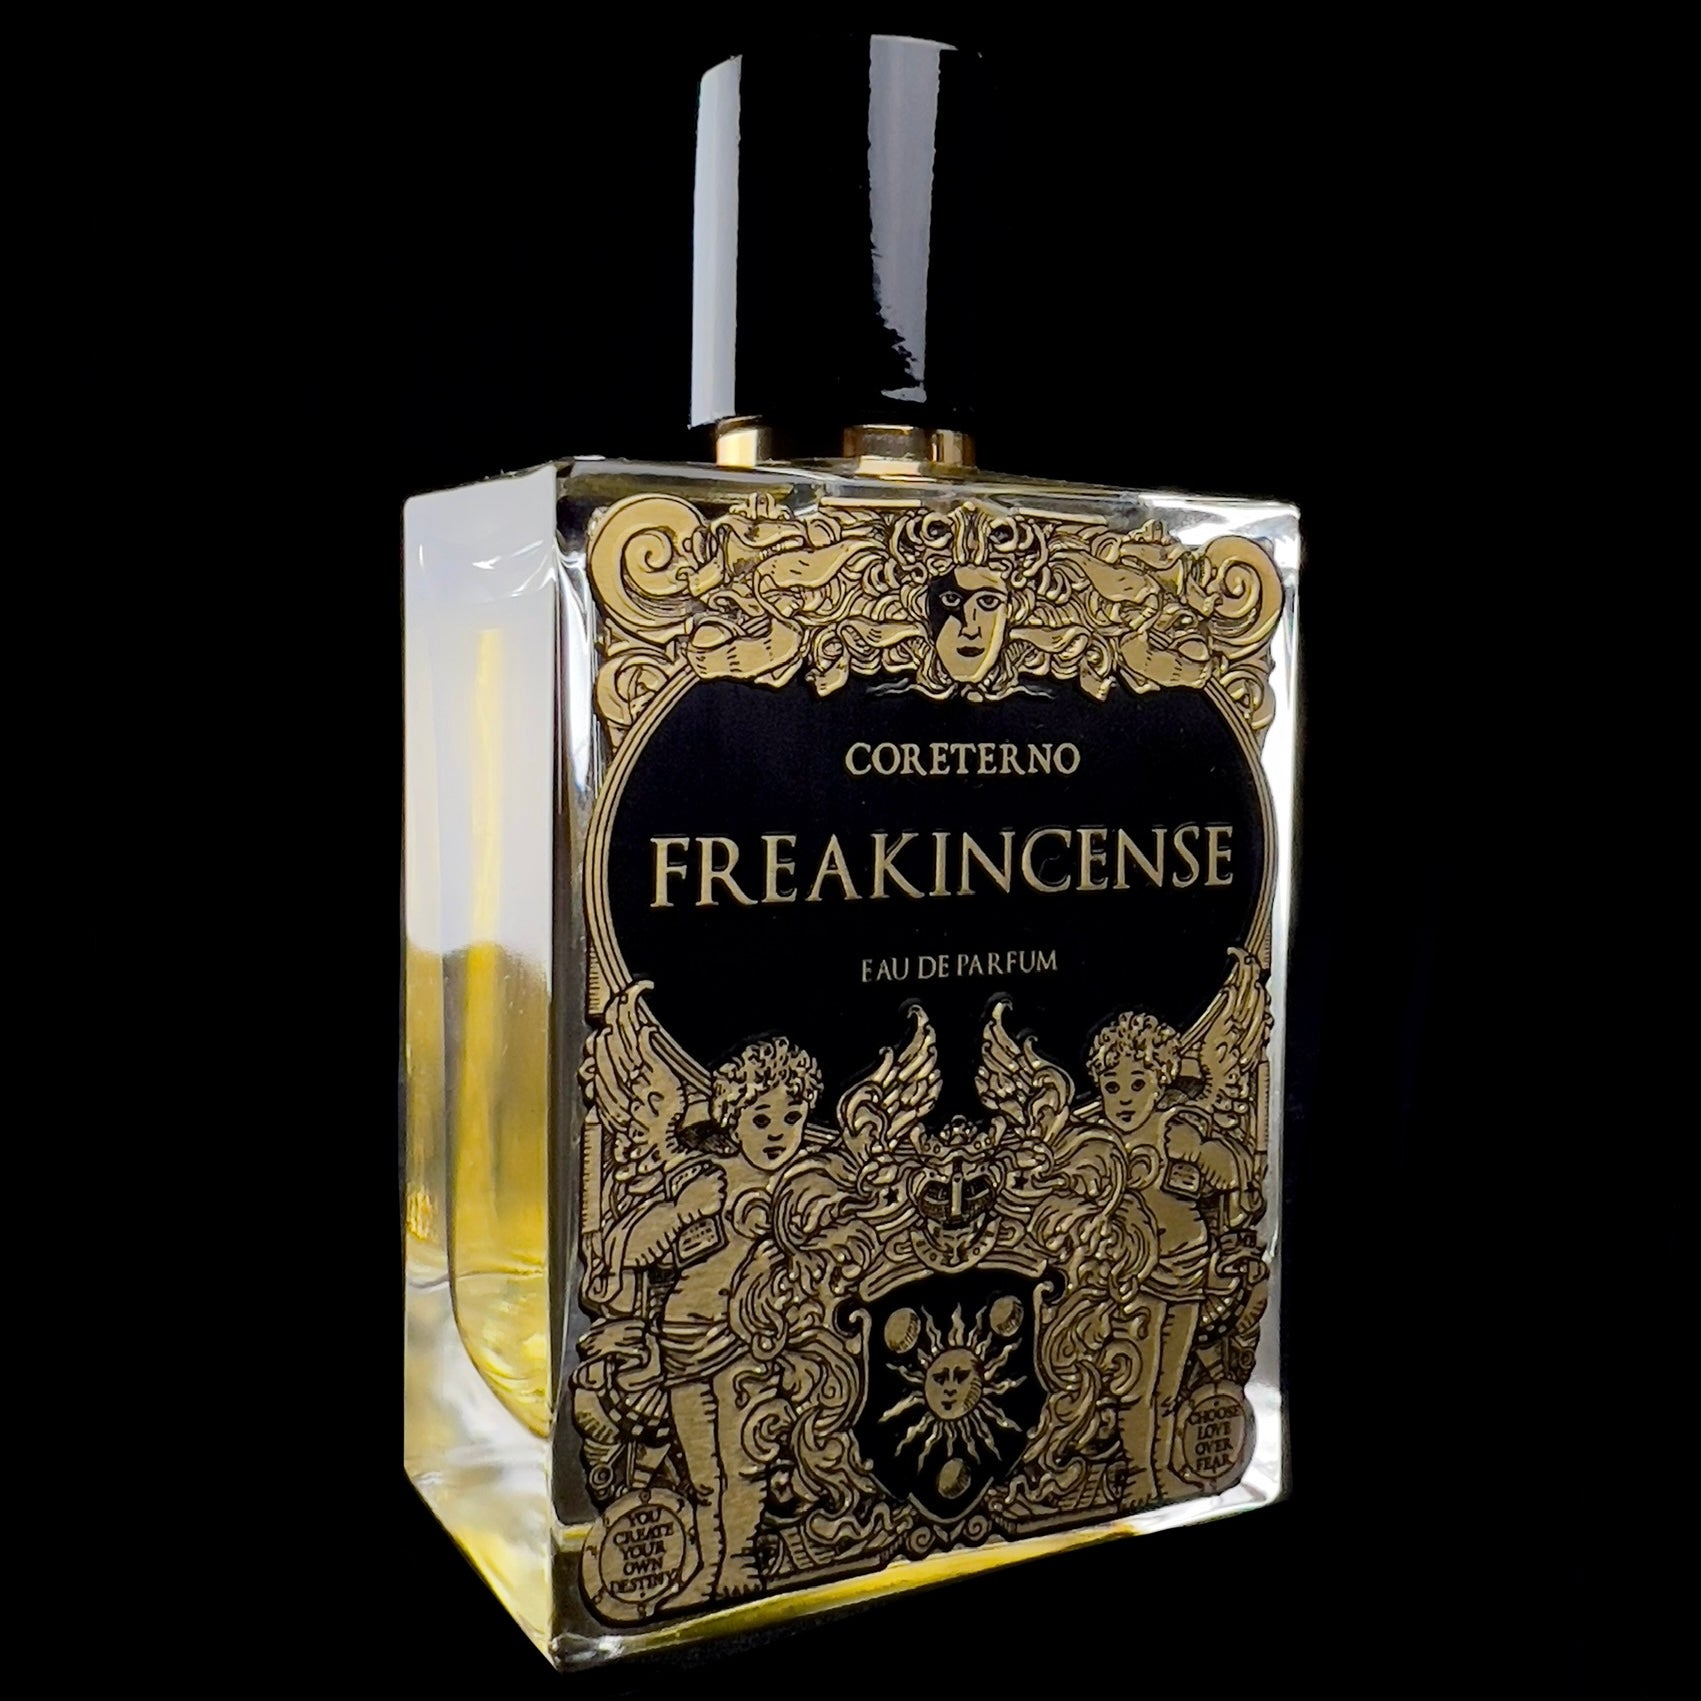 Front view of Freakinsense Parfum bottle with black and gold label